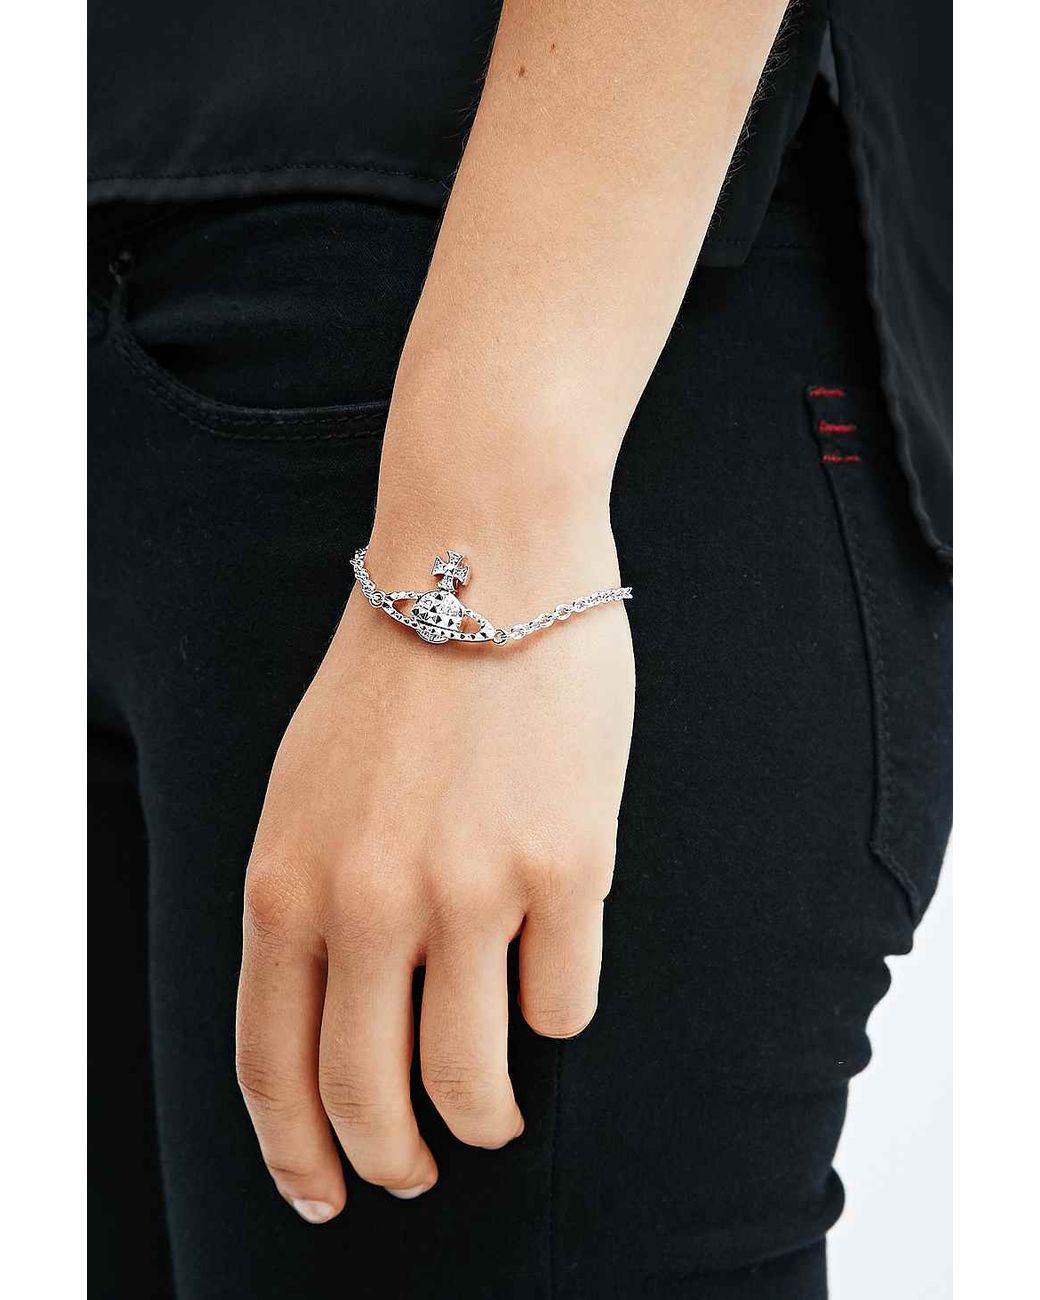 VIVIENNE WESTWOOD JEWELLERY - Mayfair Bas Relief rose gold- and  rhodium-plated brass and crystal charm bracelet | Selfridges.com